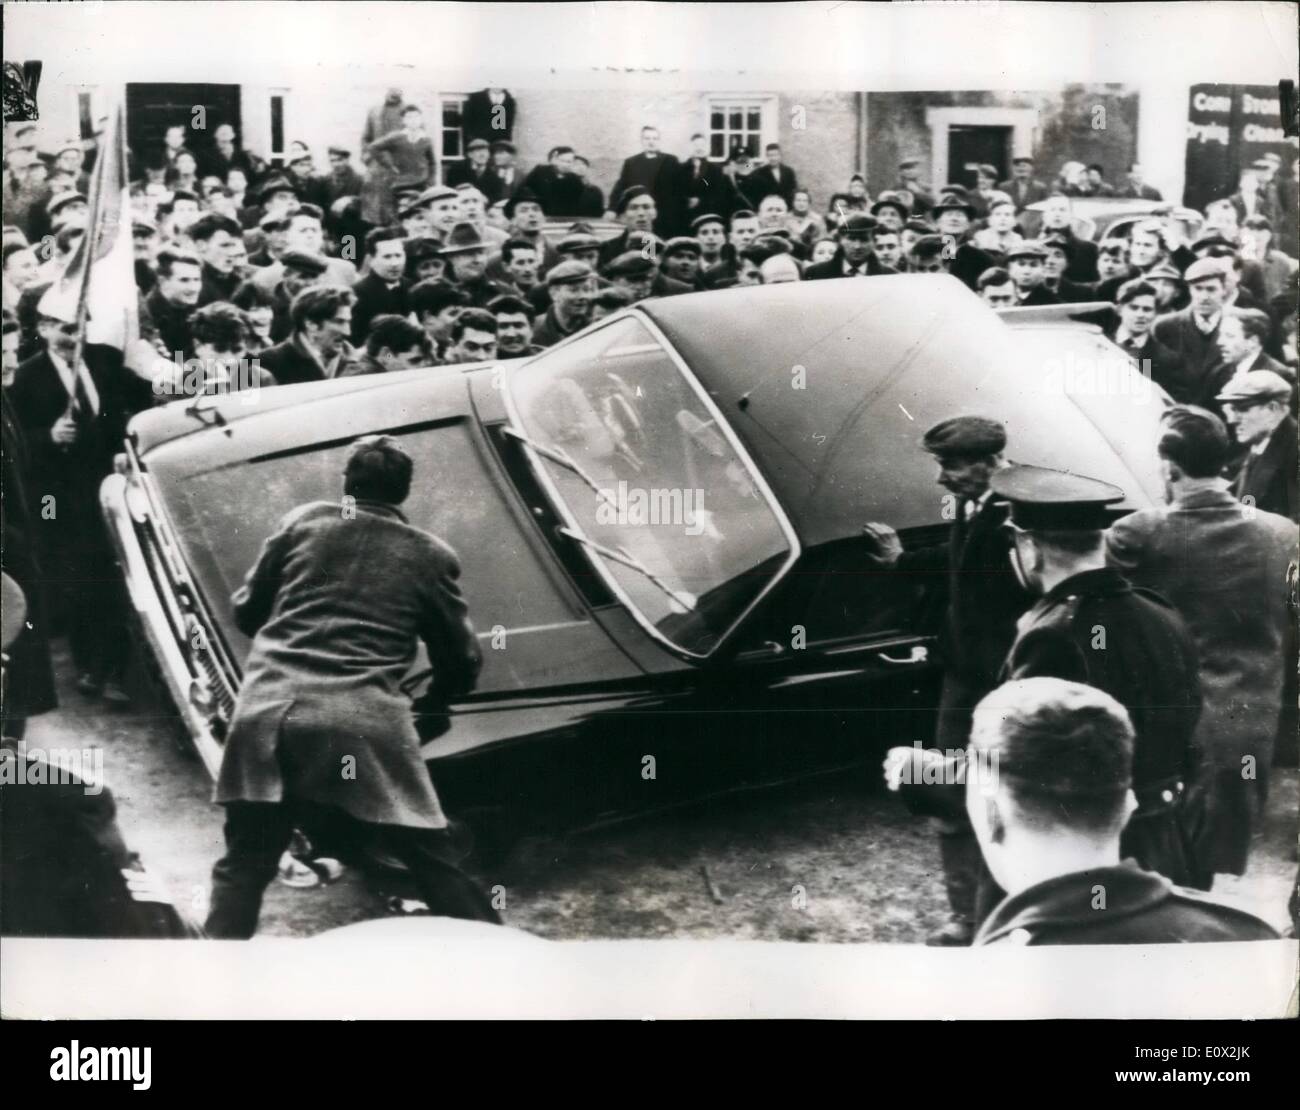 Jan. 01, 1965 - Royal Visit court STC med st. rioters. Demonstrators struggle with Police: A rioting men injured police, hurled Stock Photo